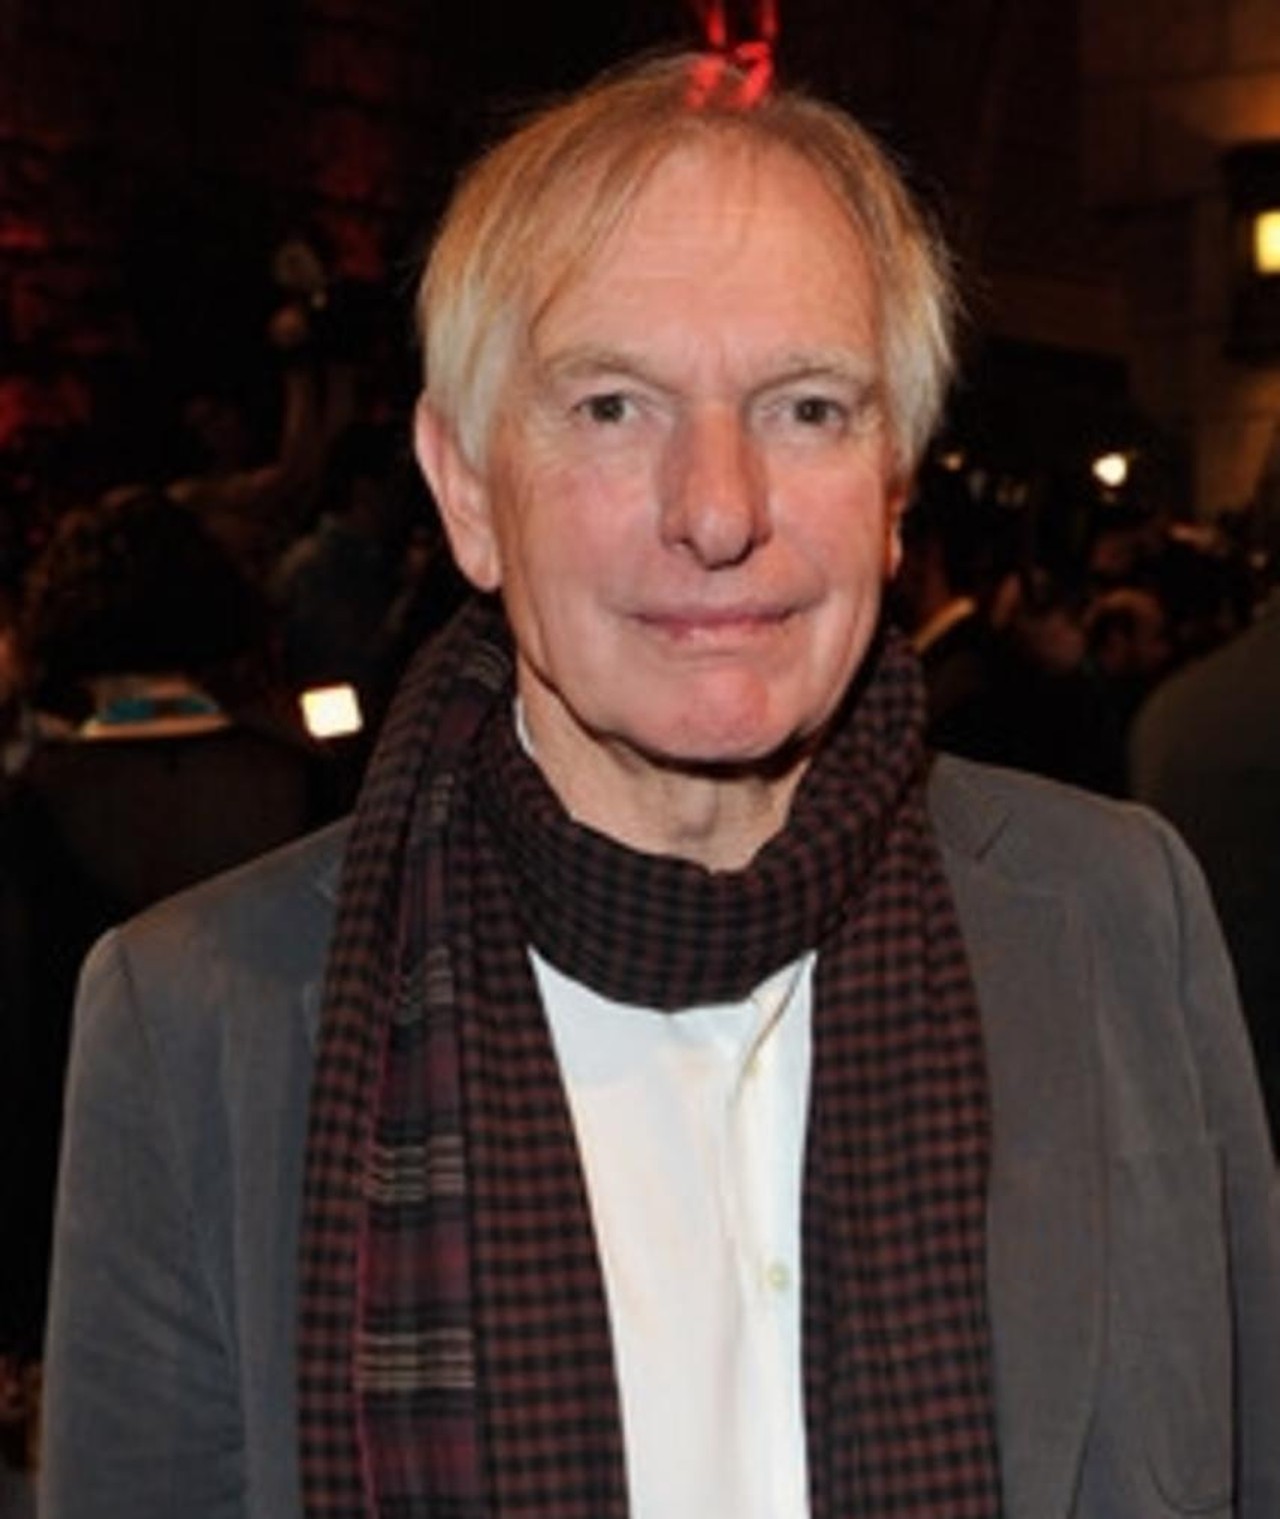 Peter weir â movies bio and lists on